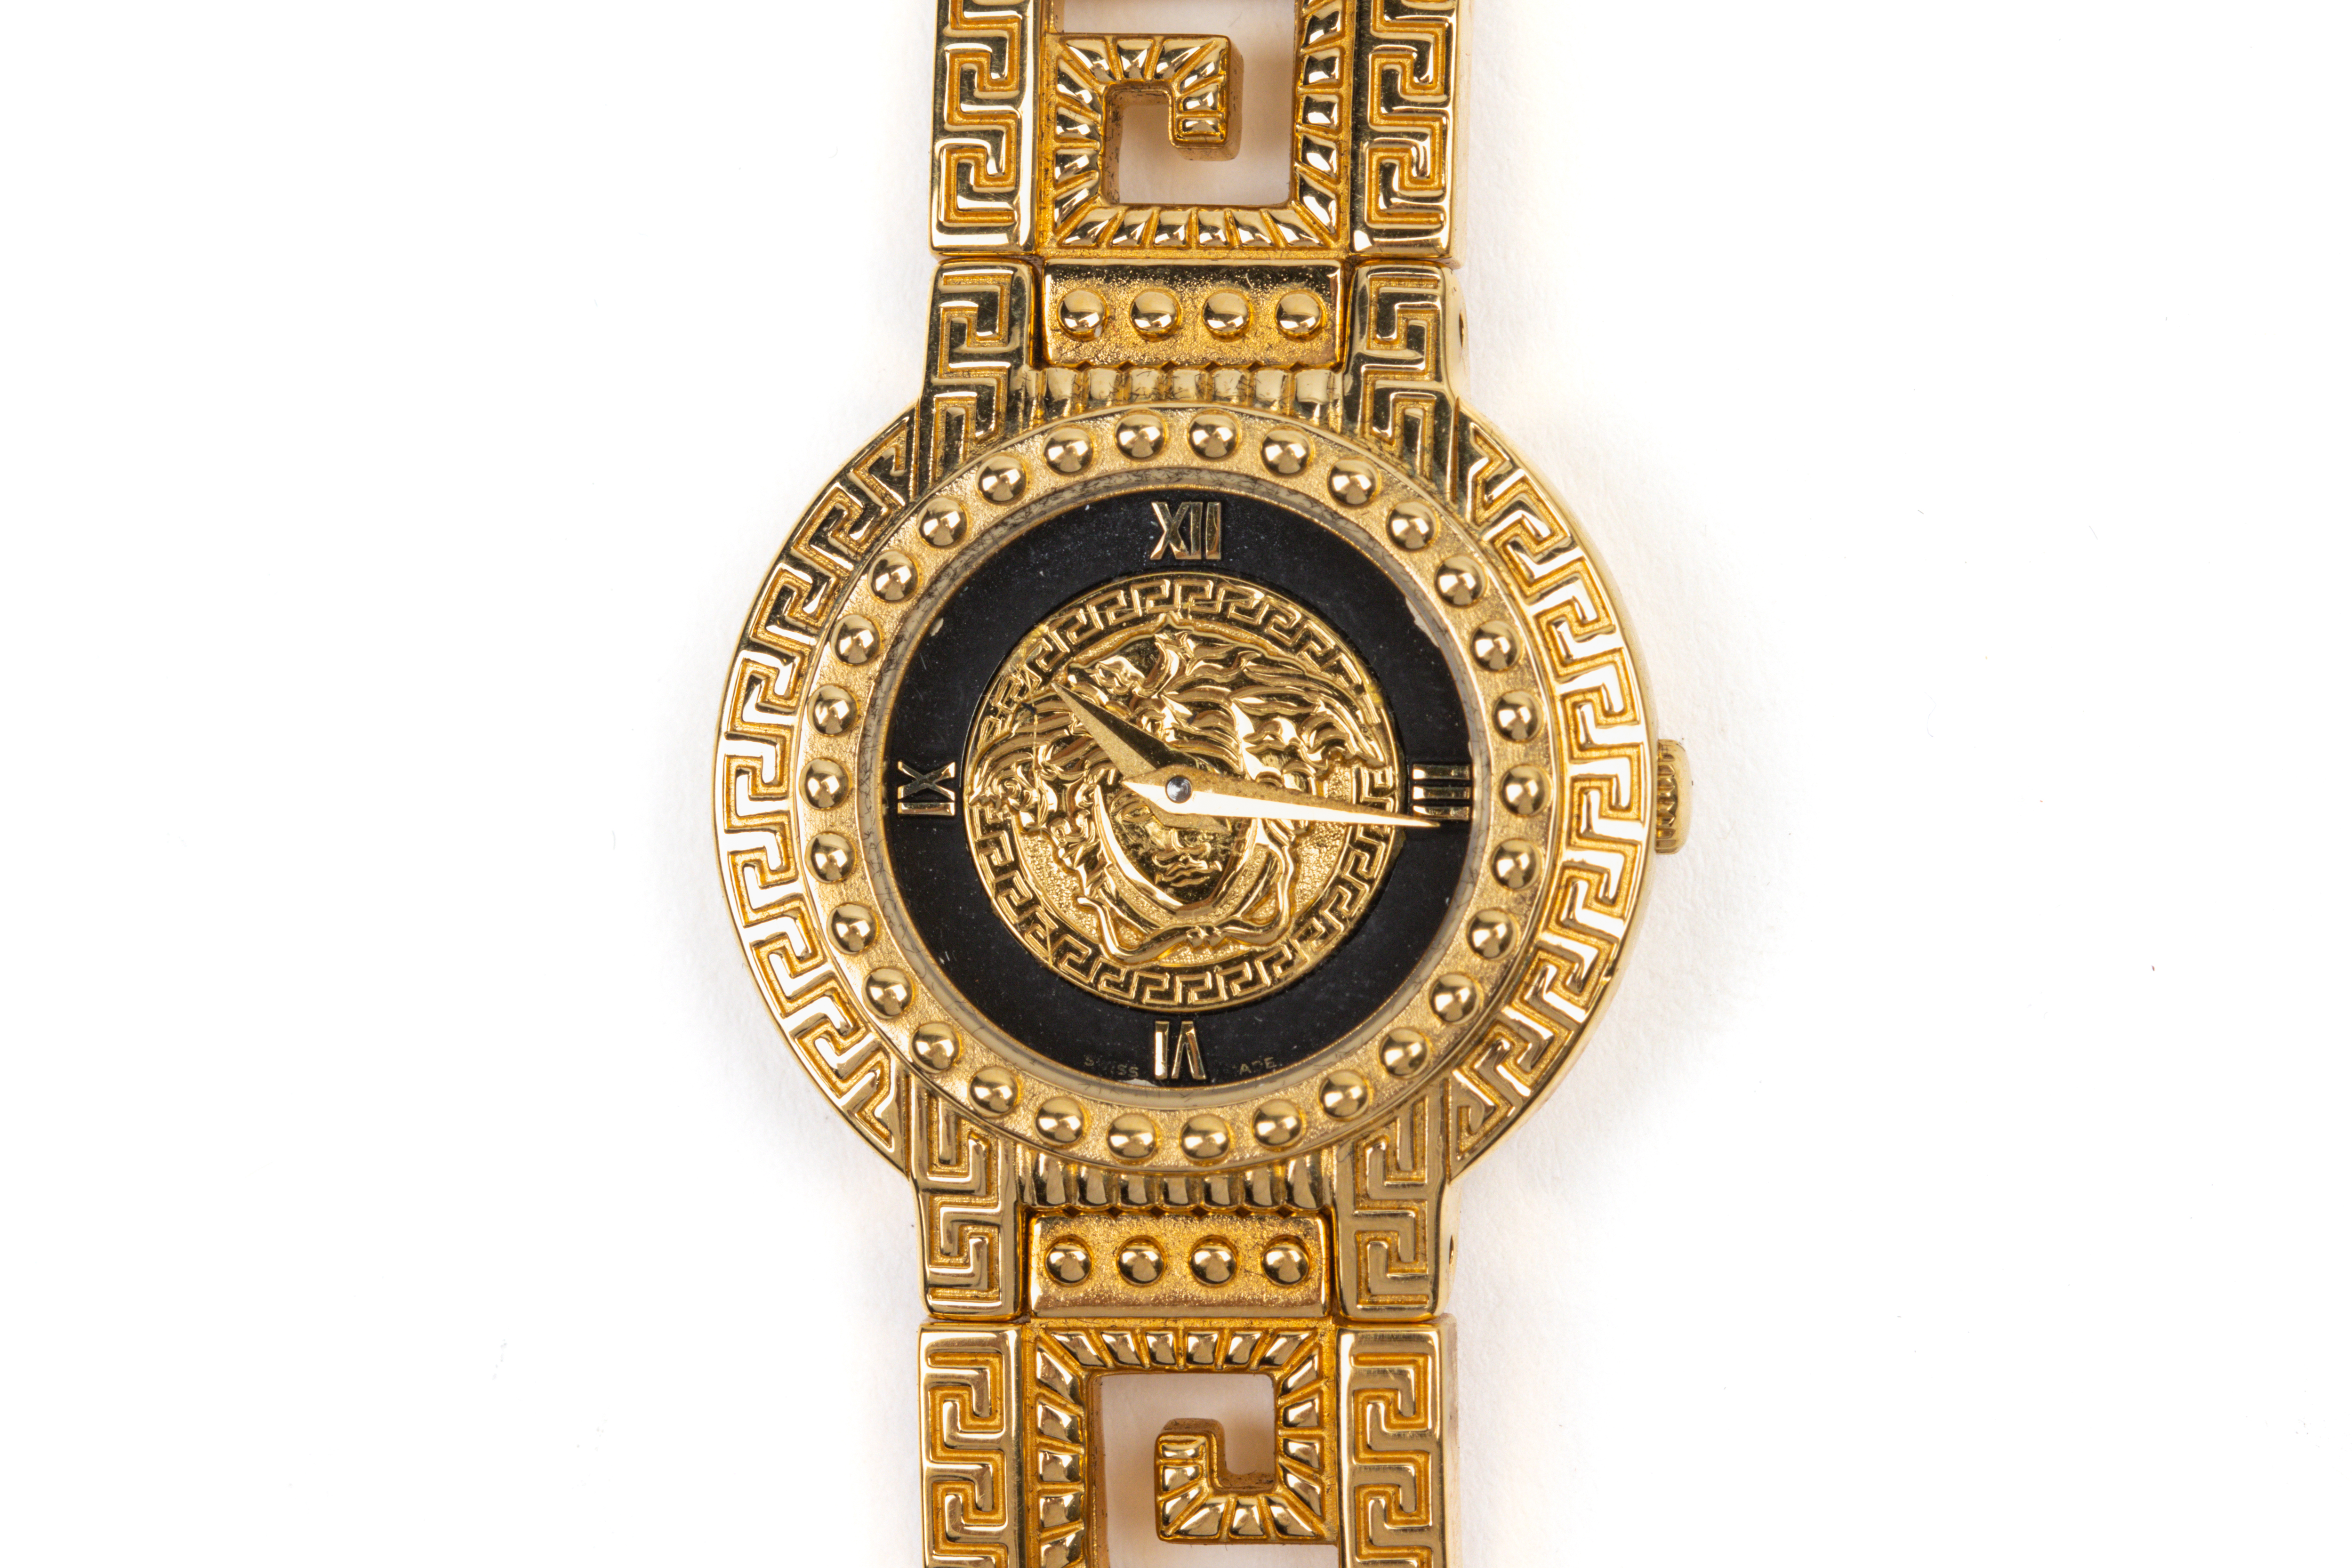 A GIANNI VERSACE SIGNATURE GOLD PLATED BRACELET WATCH